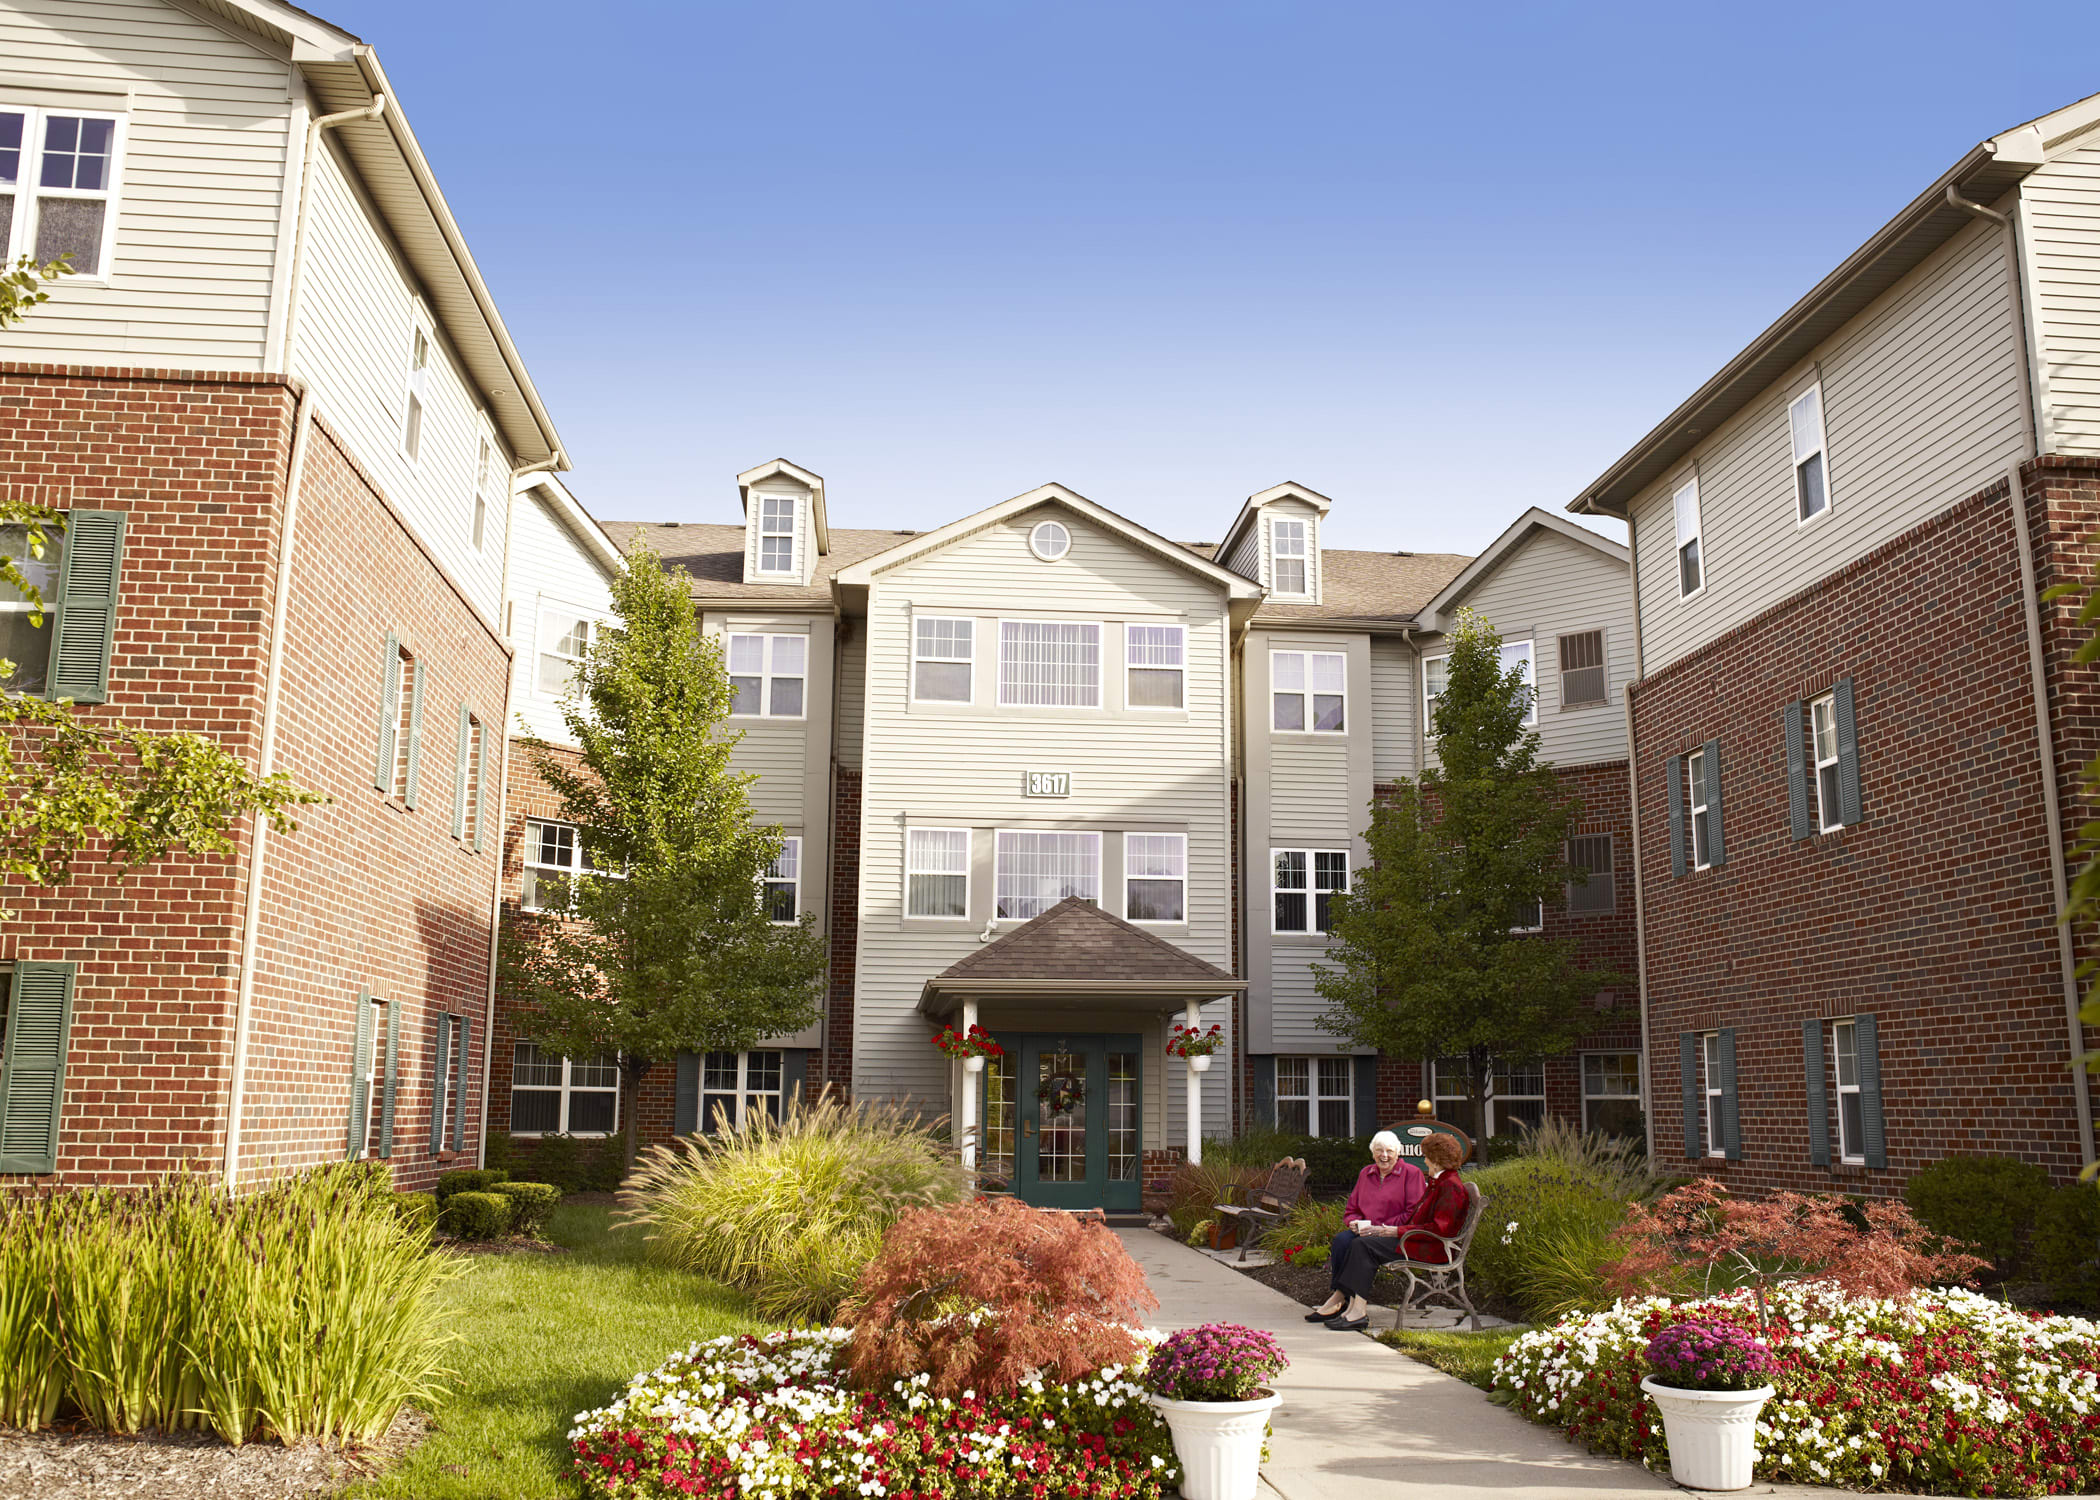 American House Village Senior Living - Rochester Hills | A Place for ...